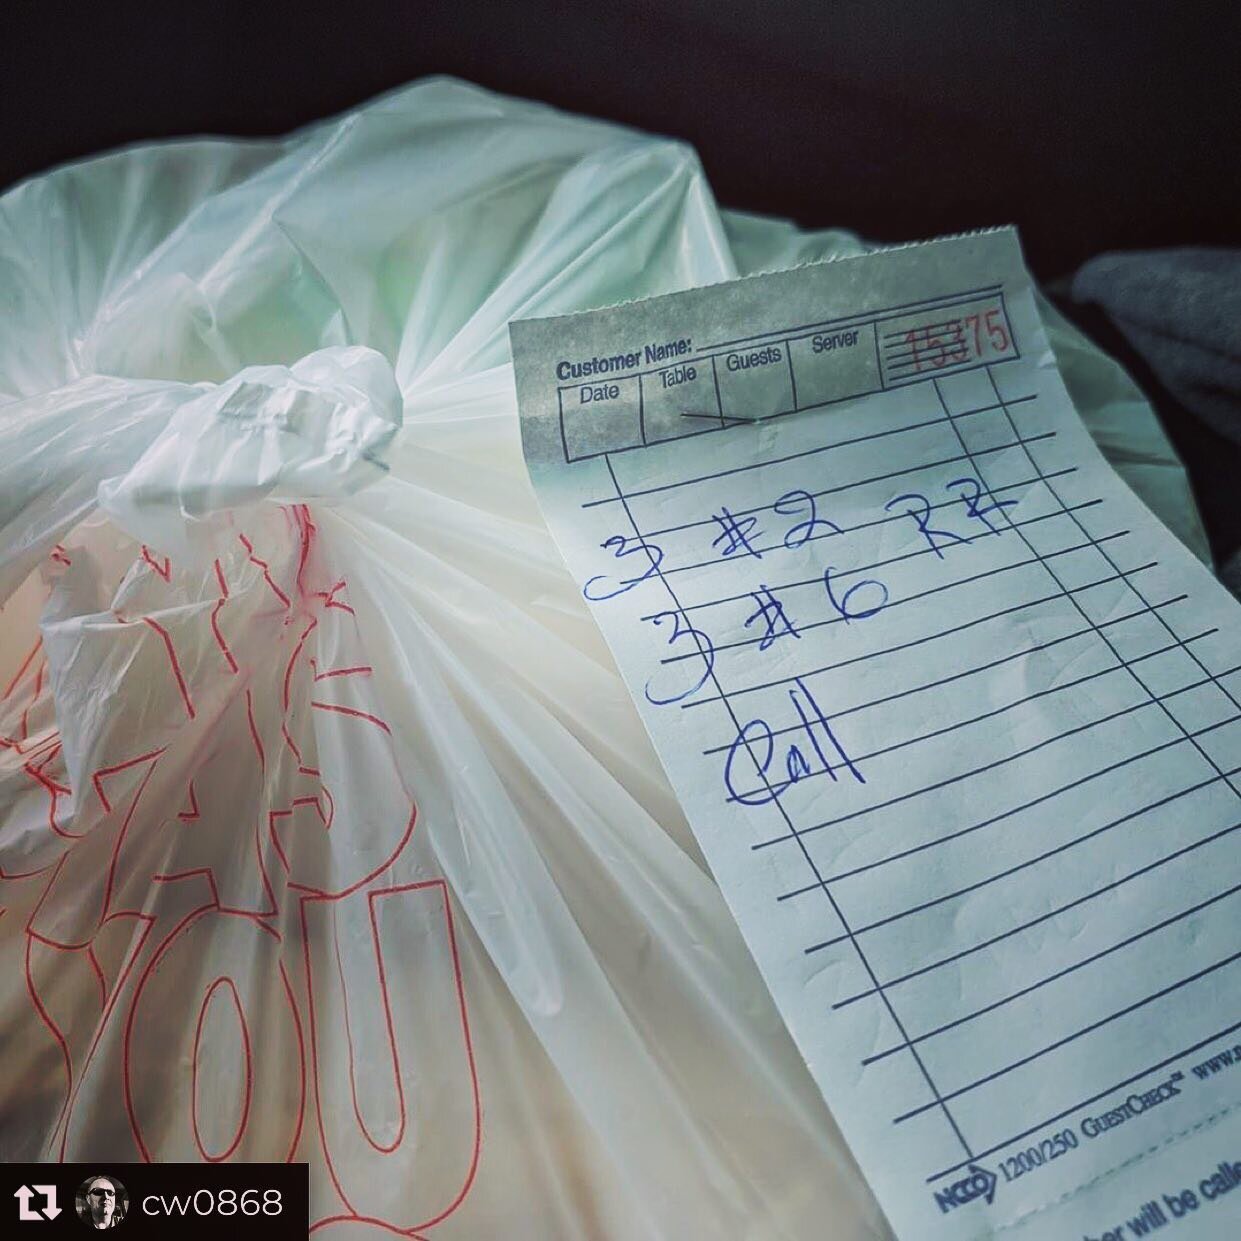 Repost from @cw0868
&bull;
Do what you can to support local business, they depend on it now and in the future @les_banhmi_clt #supportlocal
&bull;
Thanks for all the support the last week and half, we definitely appreciate it. Please go and support a